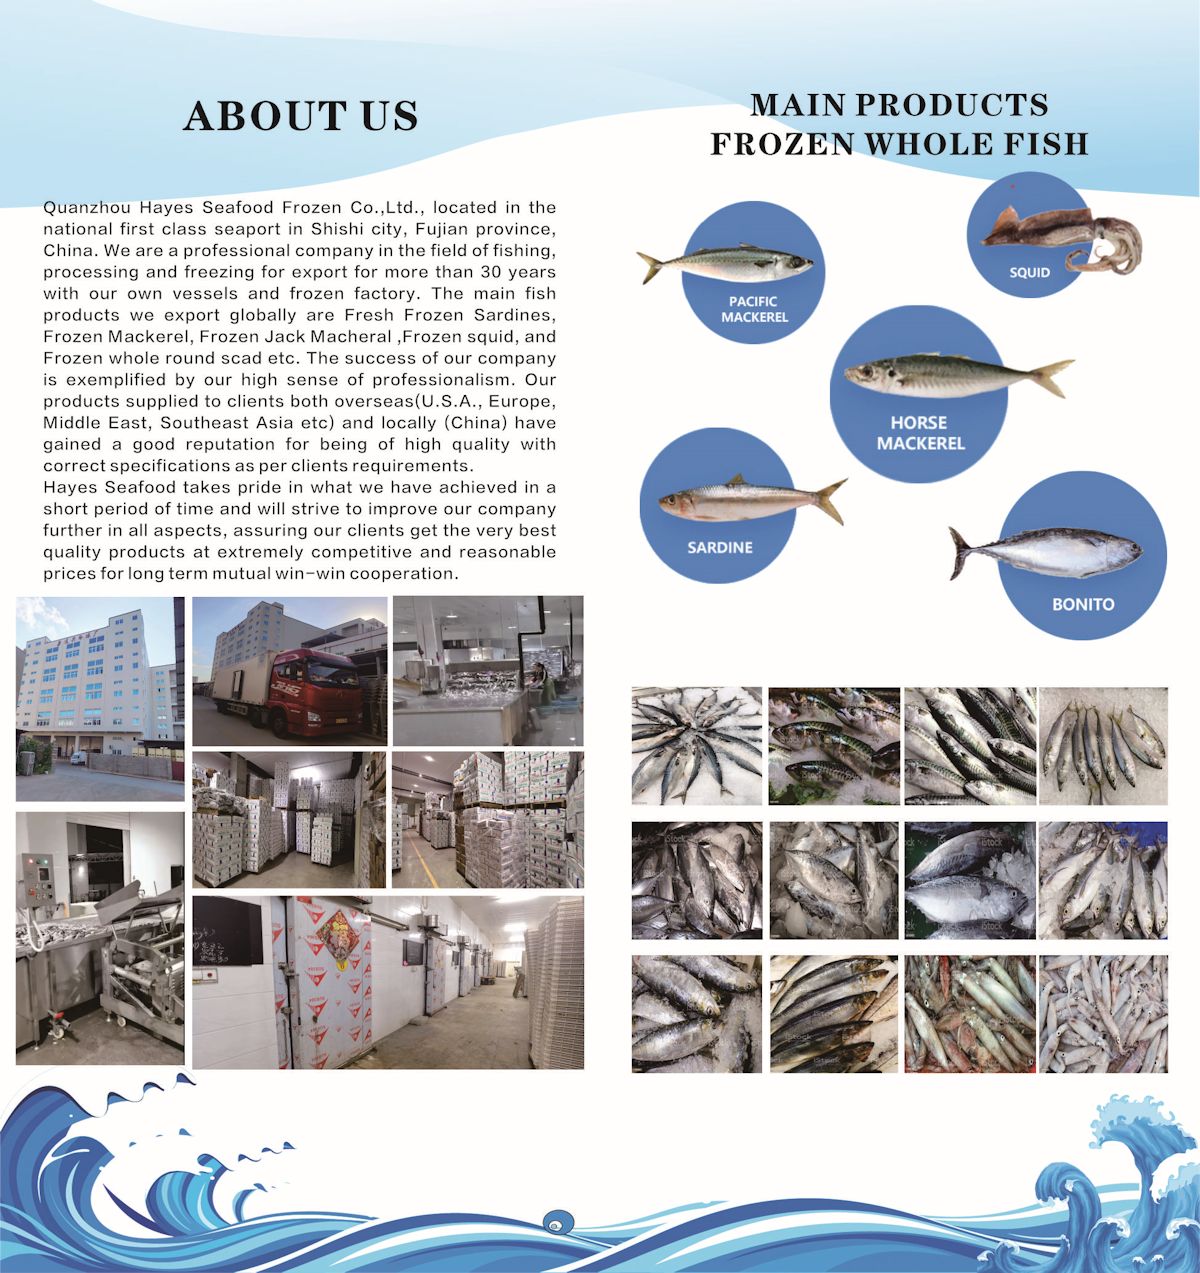 Located in the national first class seaport in Shishi City, Fujian Province, China. We are a professional company in the field of fishing, processing and freezing for export for more than 30 years with our own essels and frozen factory. The main fish products we export globally are Fresh Frozen Sardines, Frozen Mackerel, Frozen Jack Mackeral, Frozen Squid and Frozen whole Round Scad etc. The success of our company is exemplified by our high sense of professionalism. Our products supplied to clients both overseas (U.S.A., Europe, Middle East, Southeast Asia etc) and locally (China) have gained a good reputation for being of high quality with correct specificaitons as per clients requirements. Hayes Seafood takes pride in what we have achieved in a short period of time and will strive to improve our company further in all aspects, assuring our clients get the very best quality products at extremely competitive and reasonal prices for long term mutual win-win cooperation.